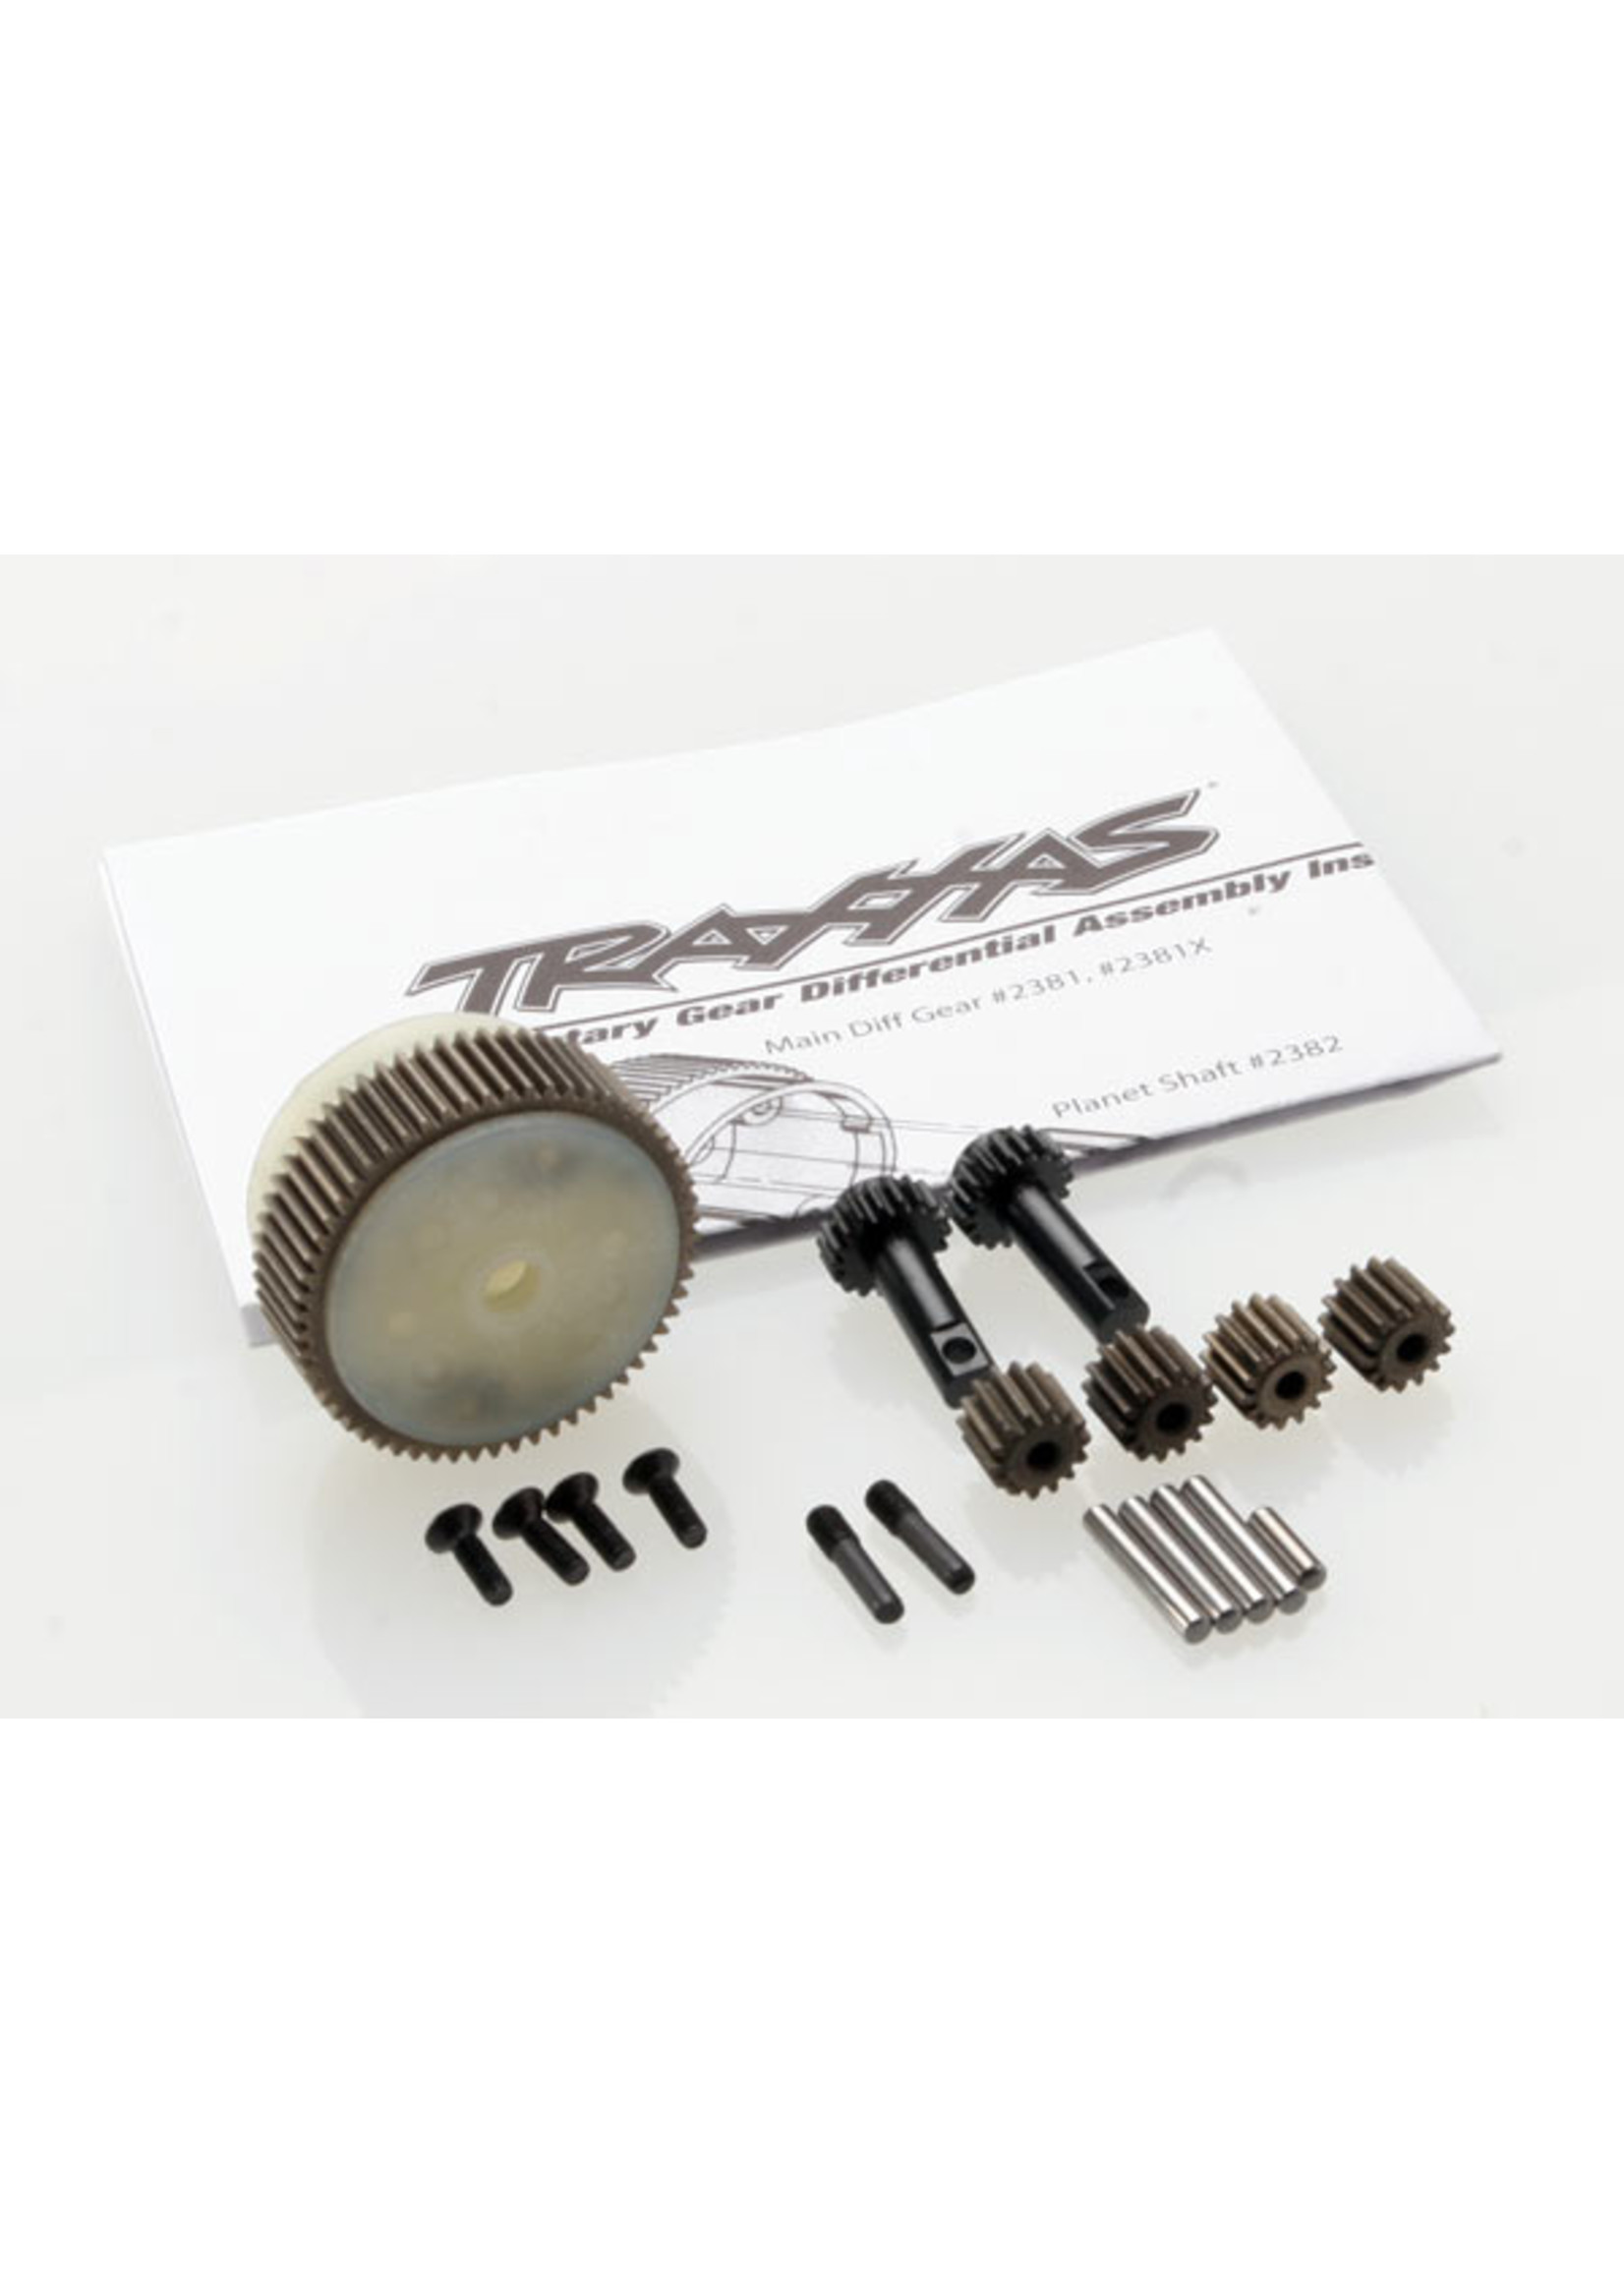 Traxxas 2388X - Planetary Gear Differential with Steel Ring Gear